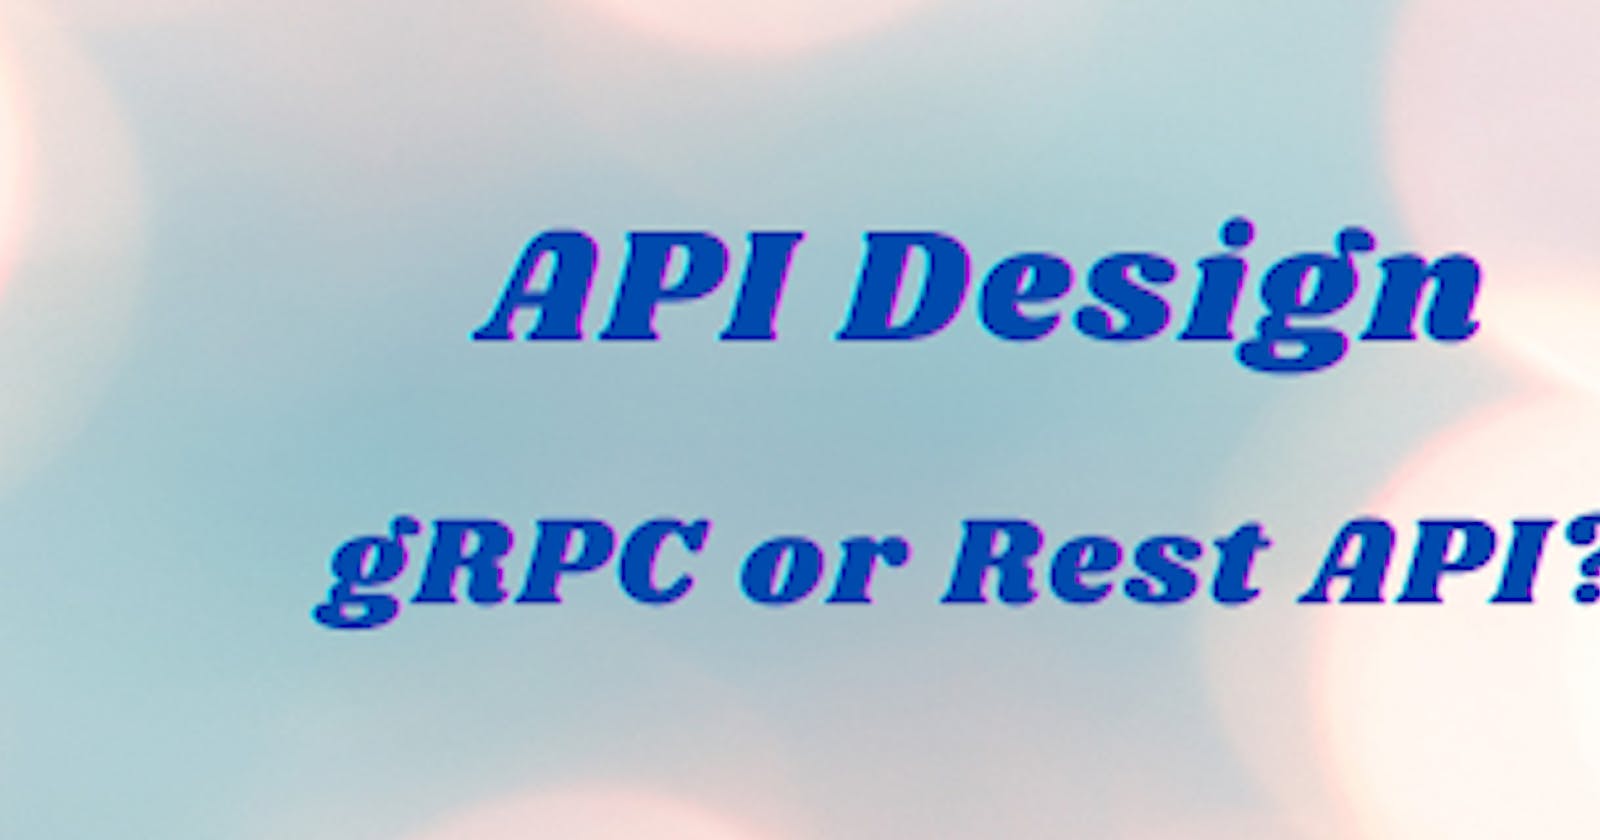 Comparing gRPC and REST: A Look at Two Popular API Design Approaches